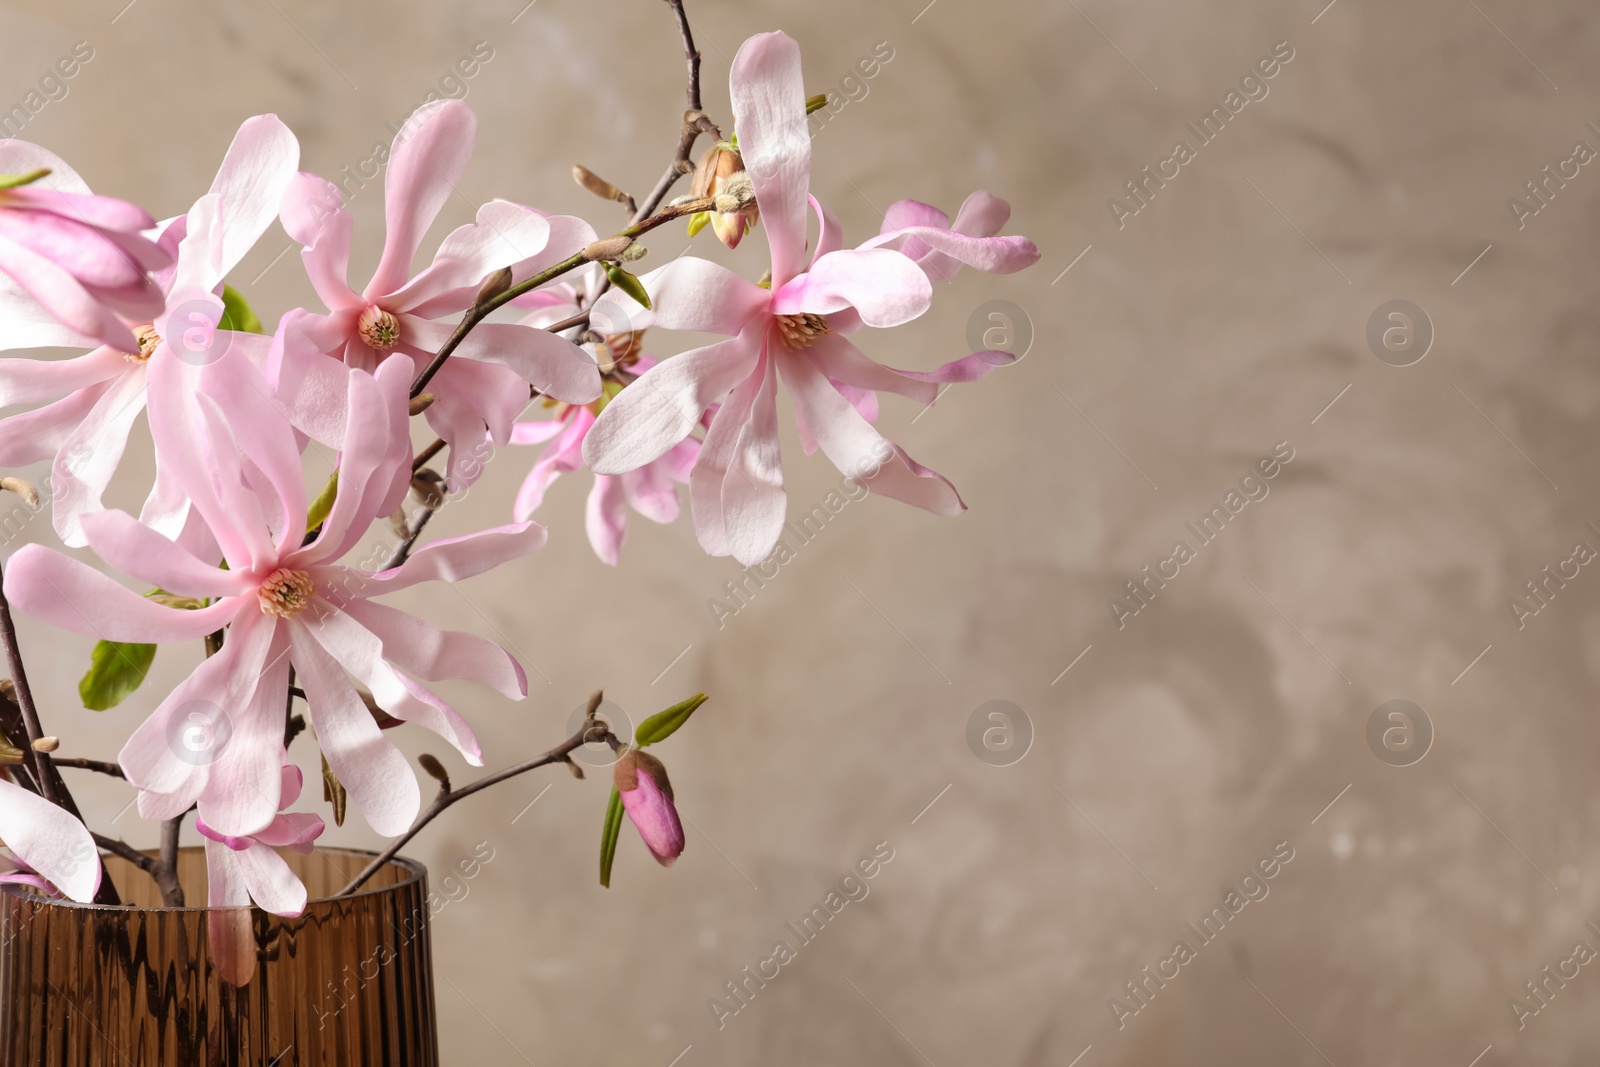 Photo of Magnolia tree branches with beautiful flowers in glass vase against grey background, closeup. Space for text